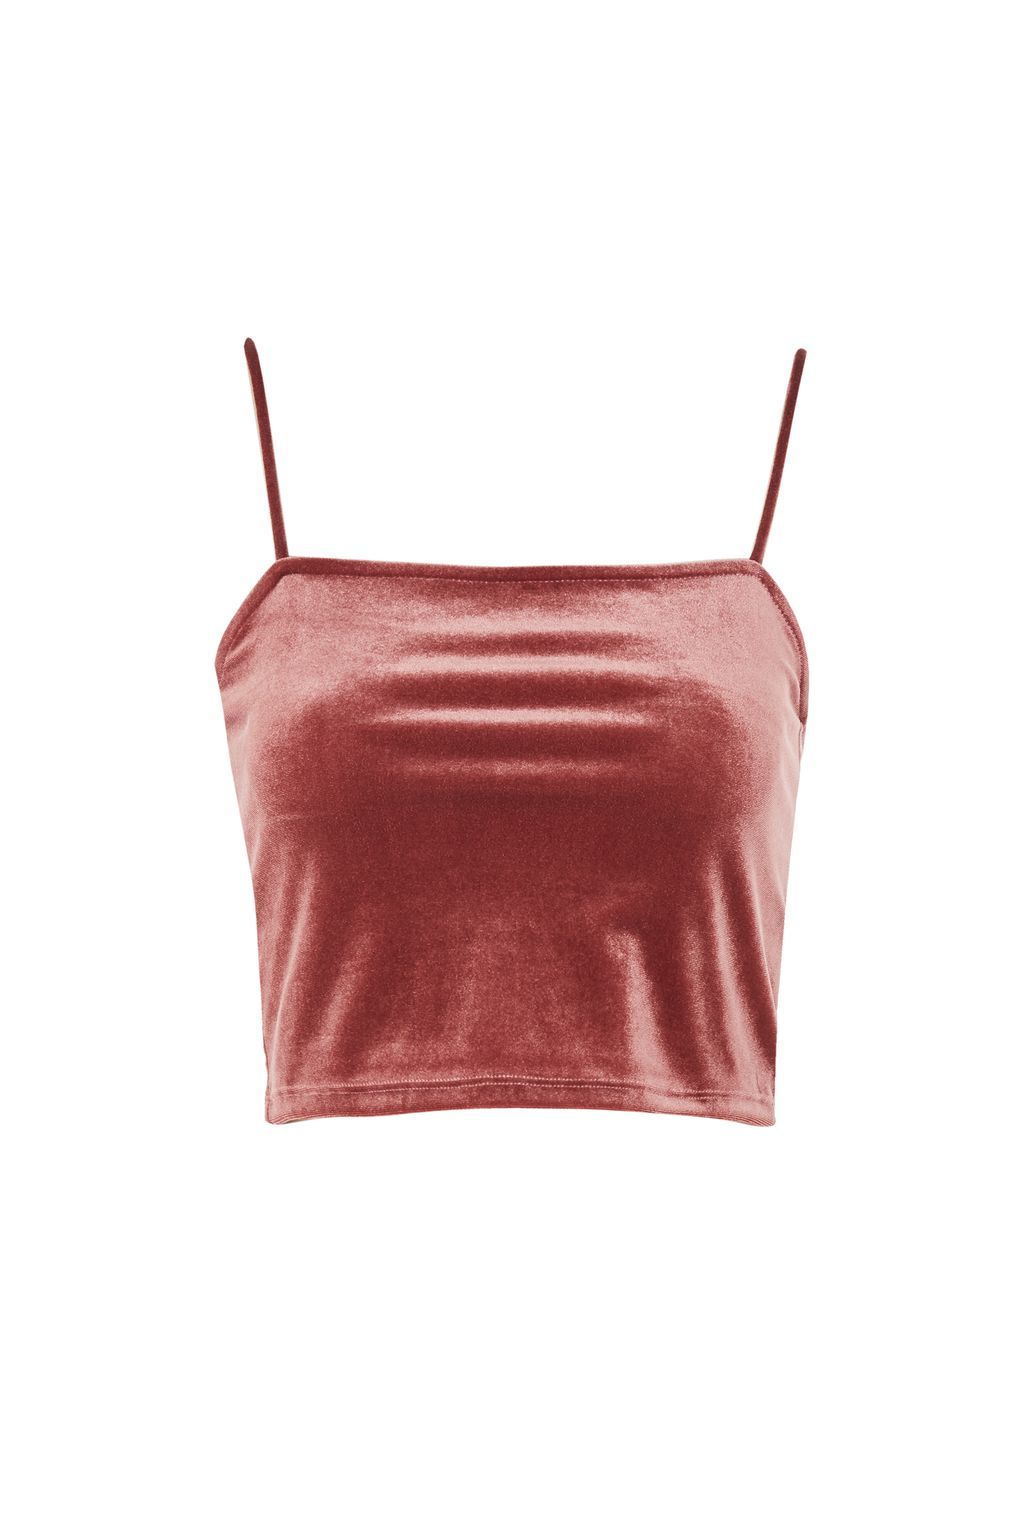 Topshop Tall Womens Tall Velvet Square Neck Camisole Pink Top - Stockpoint Apparel Outlet